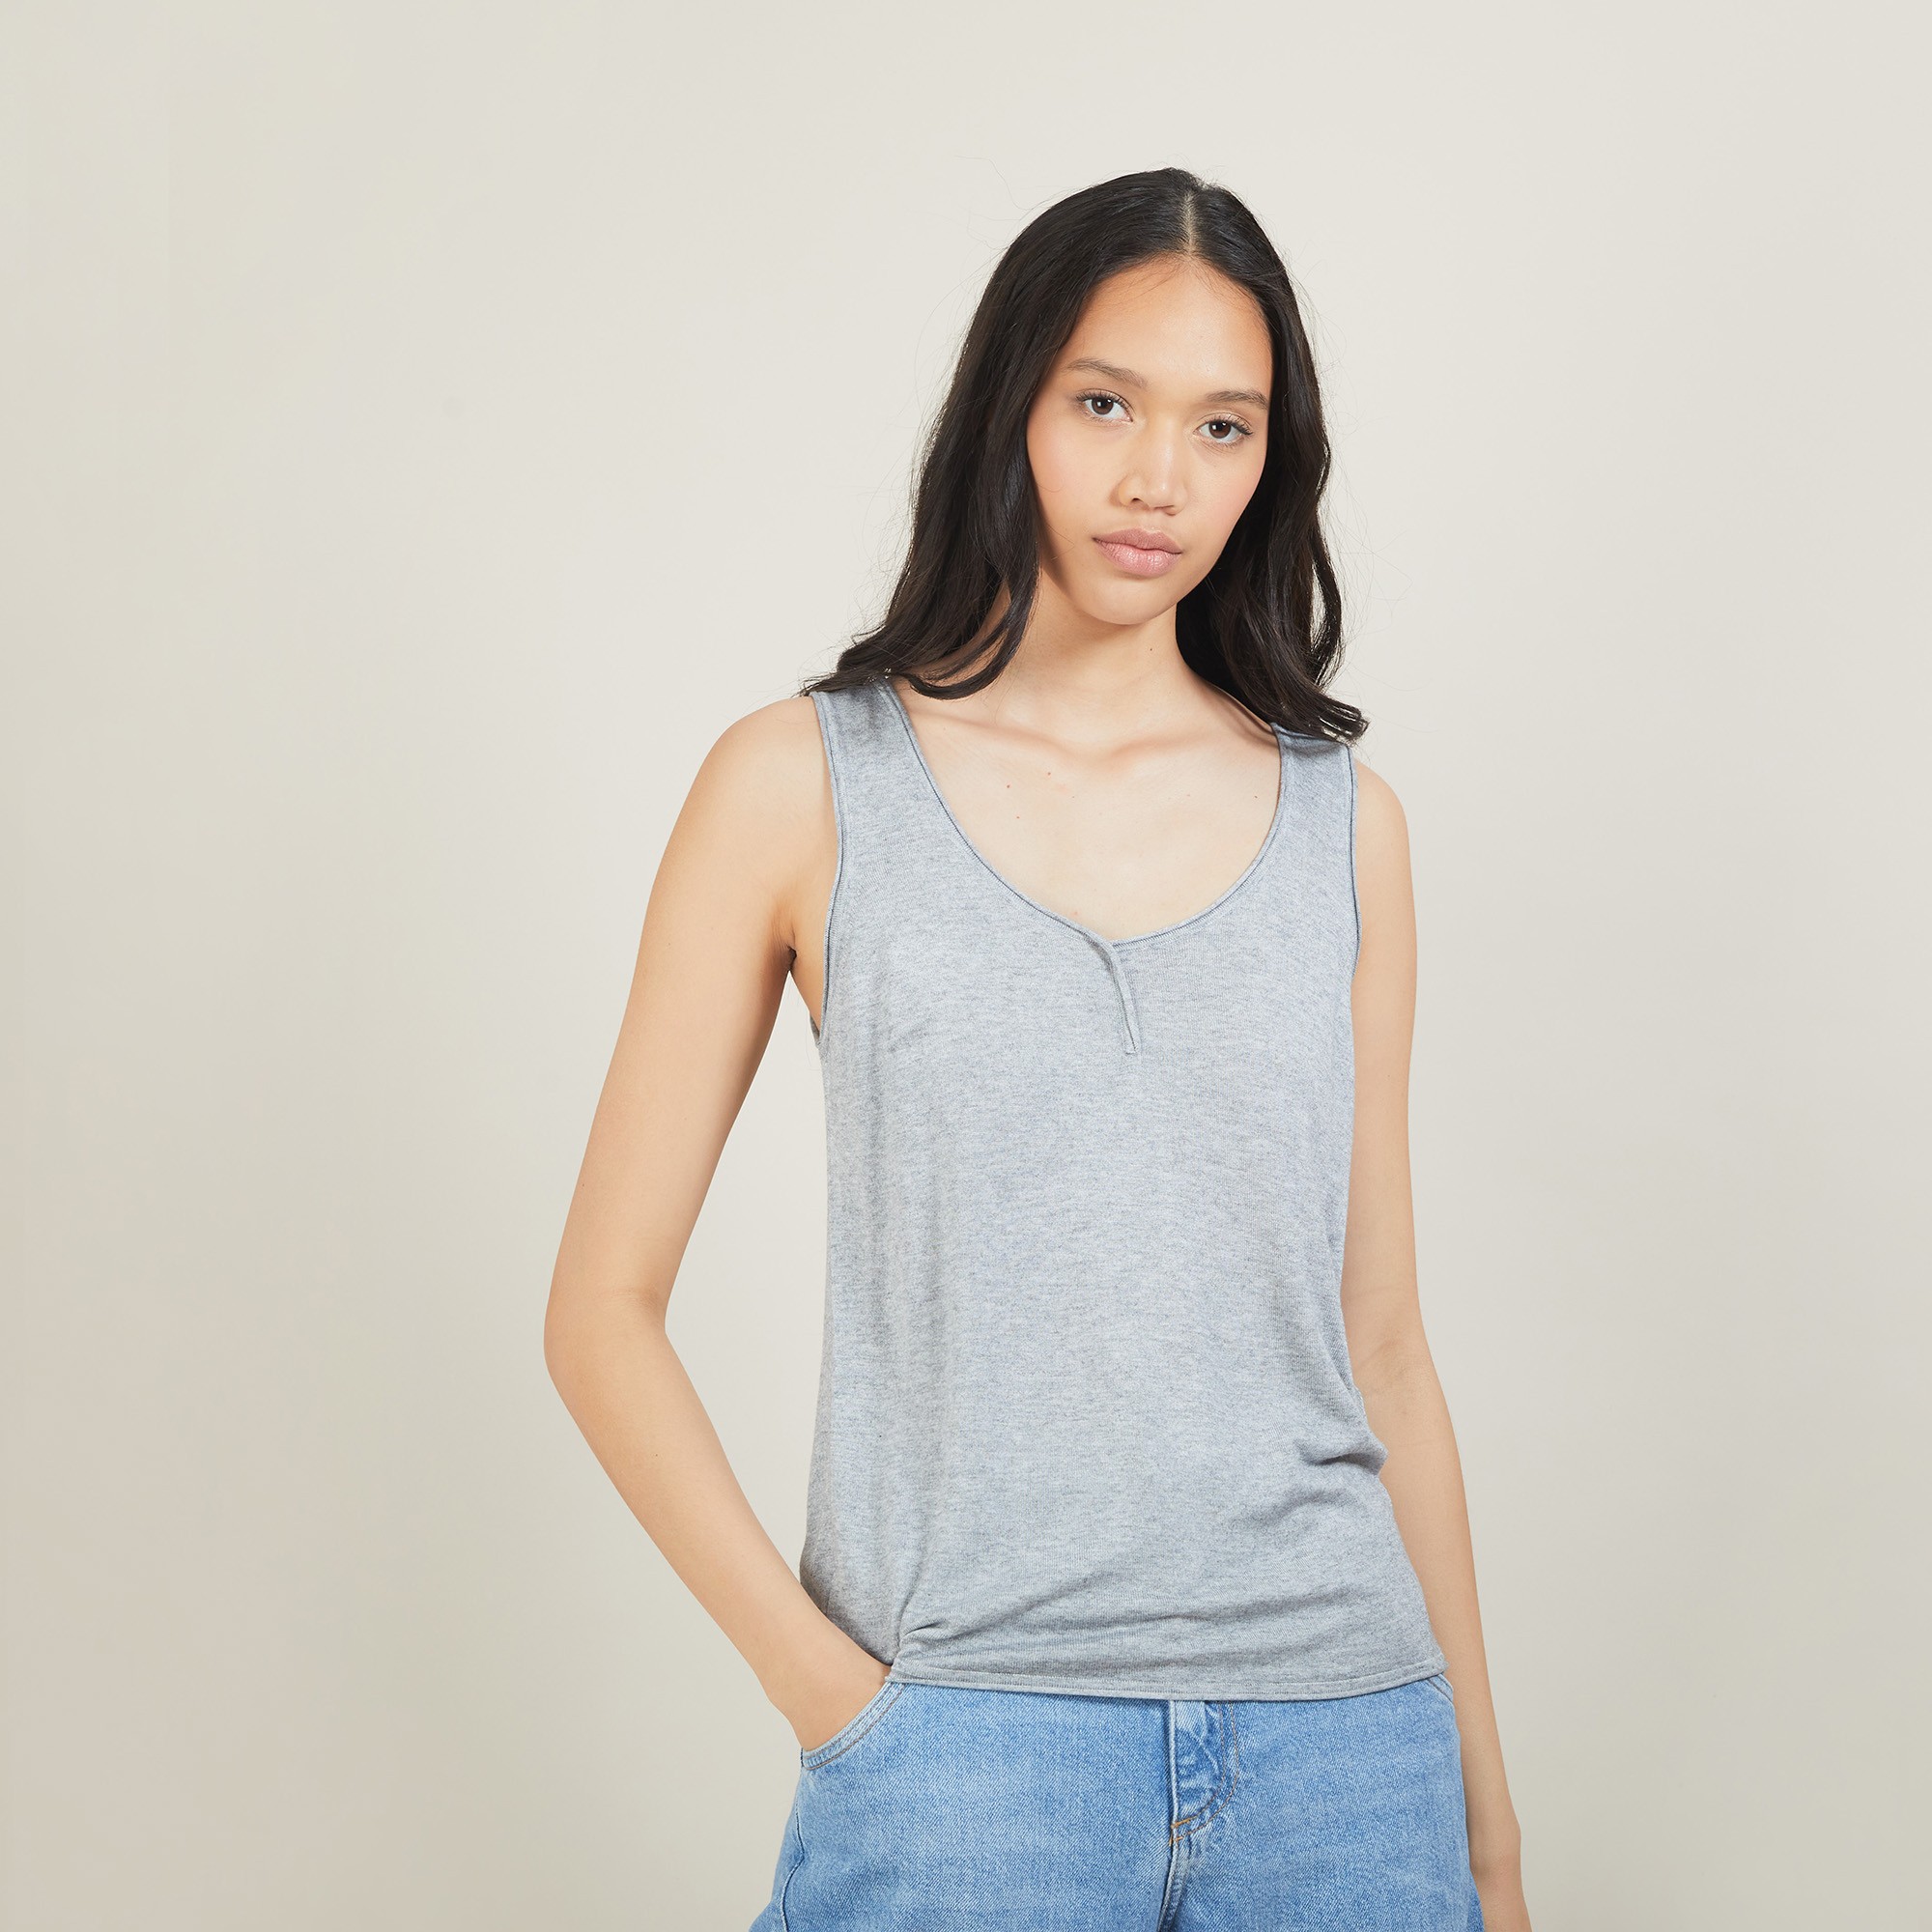 Bamboo cashmere tank top